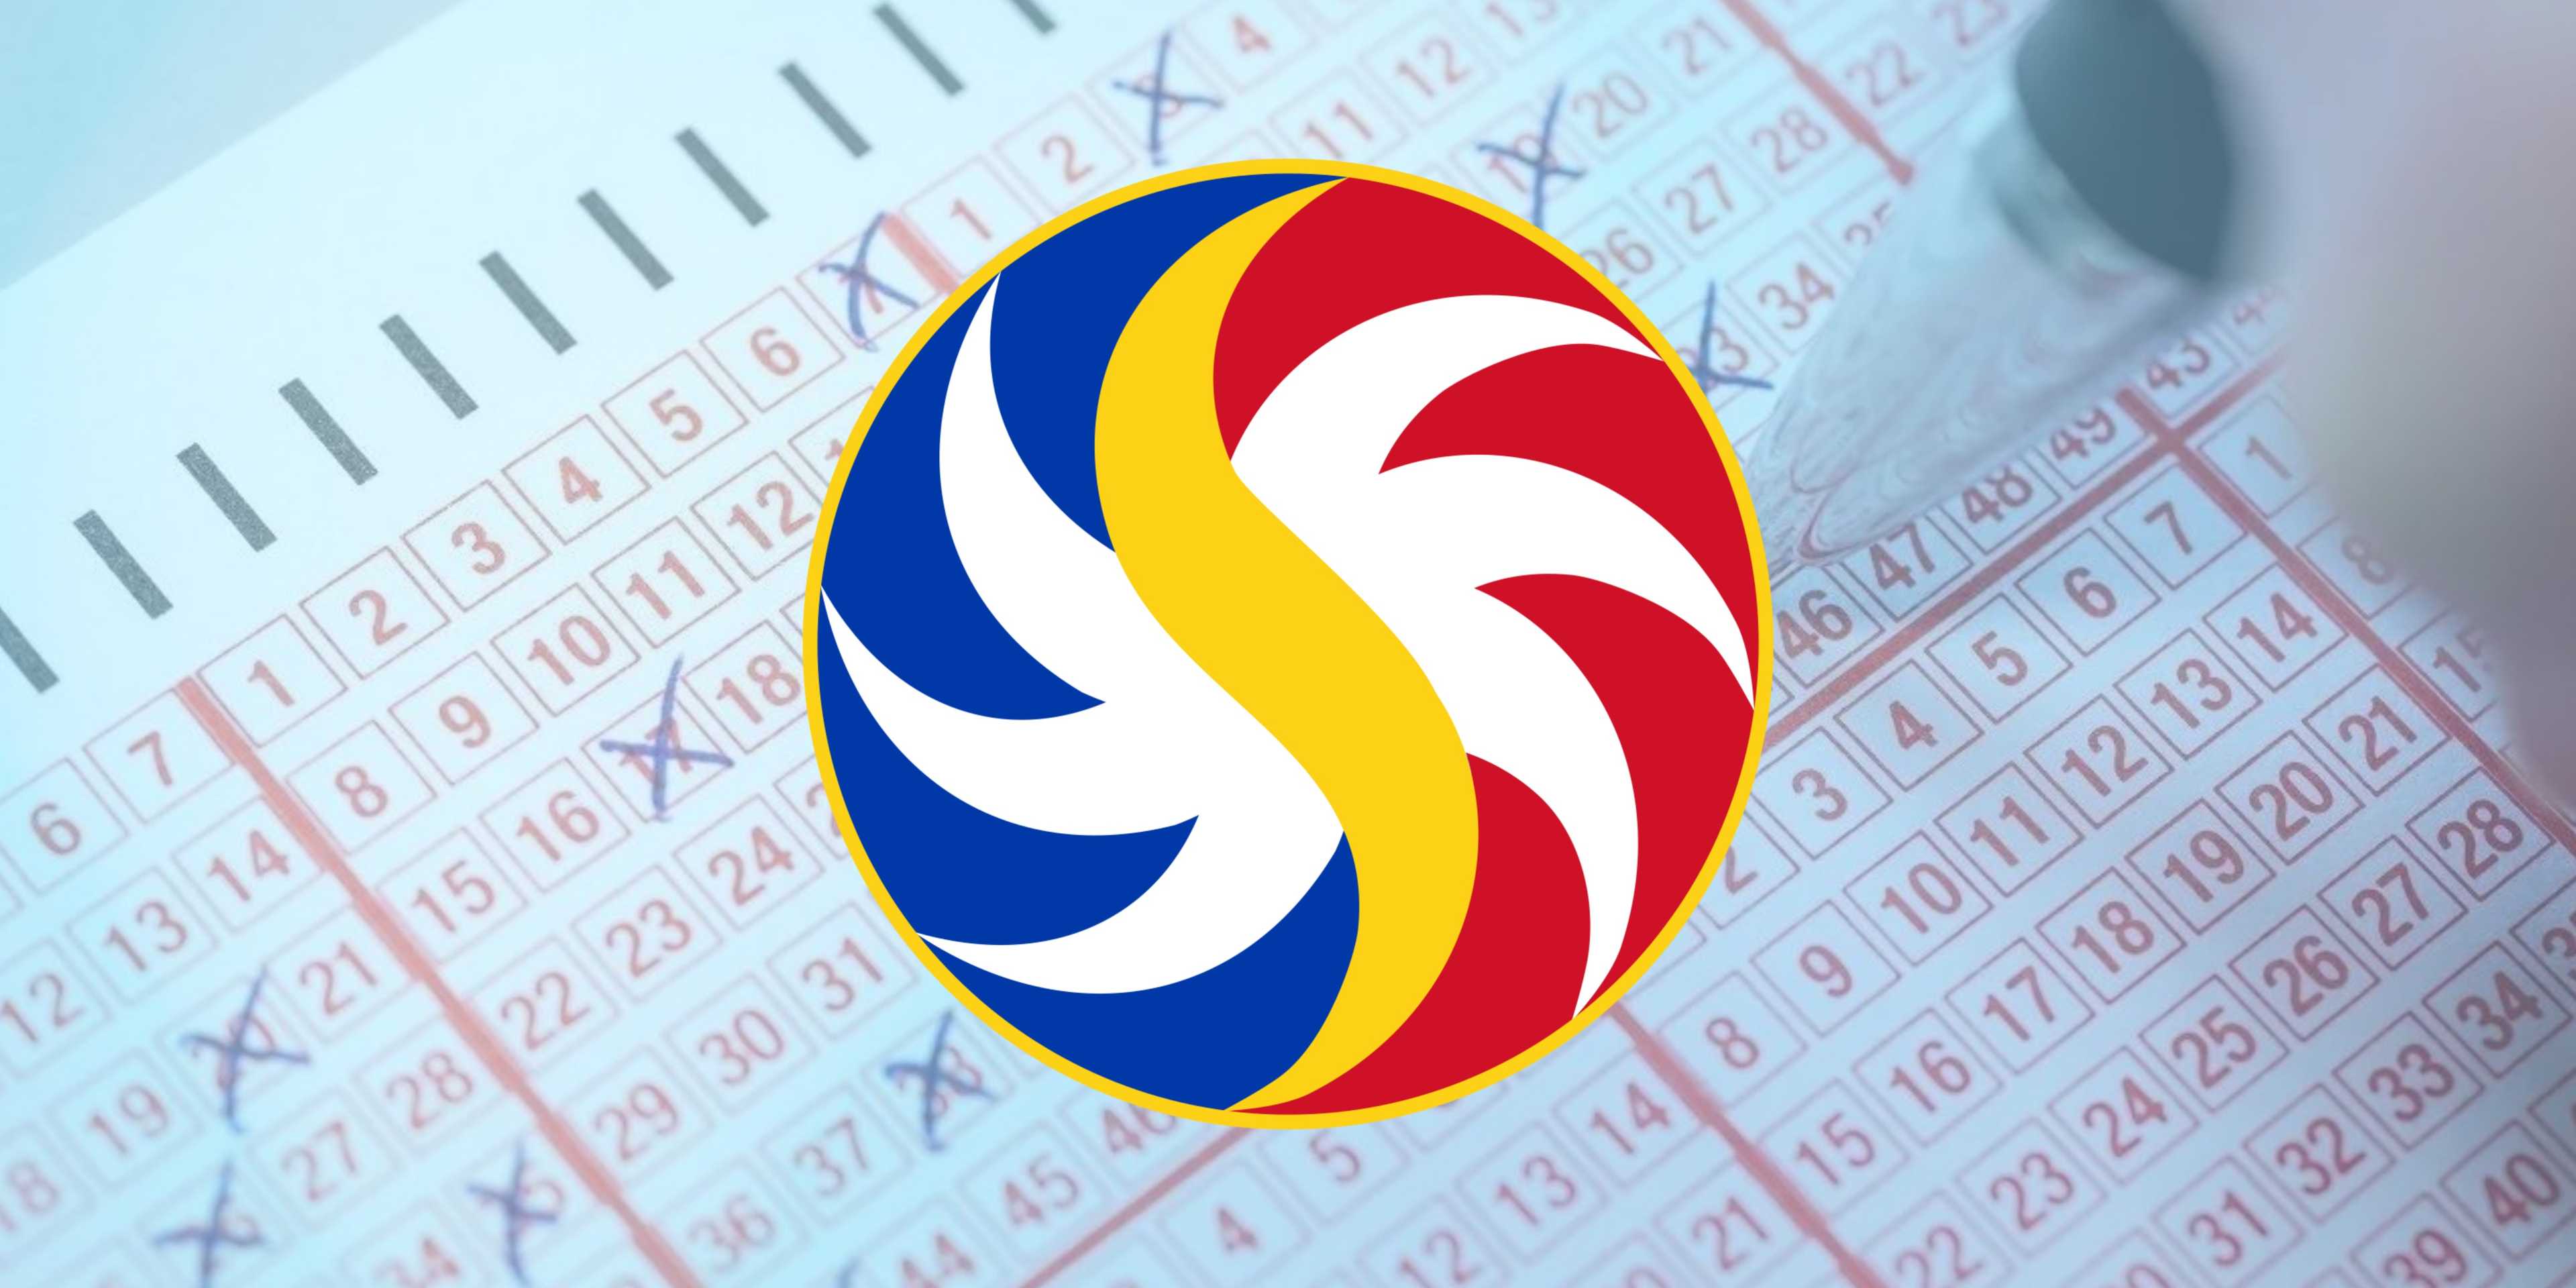 PCSO Lotto Draw Results on Monday, March 18